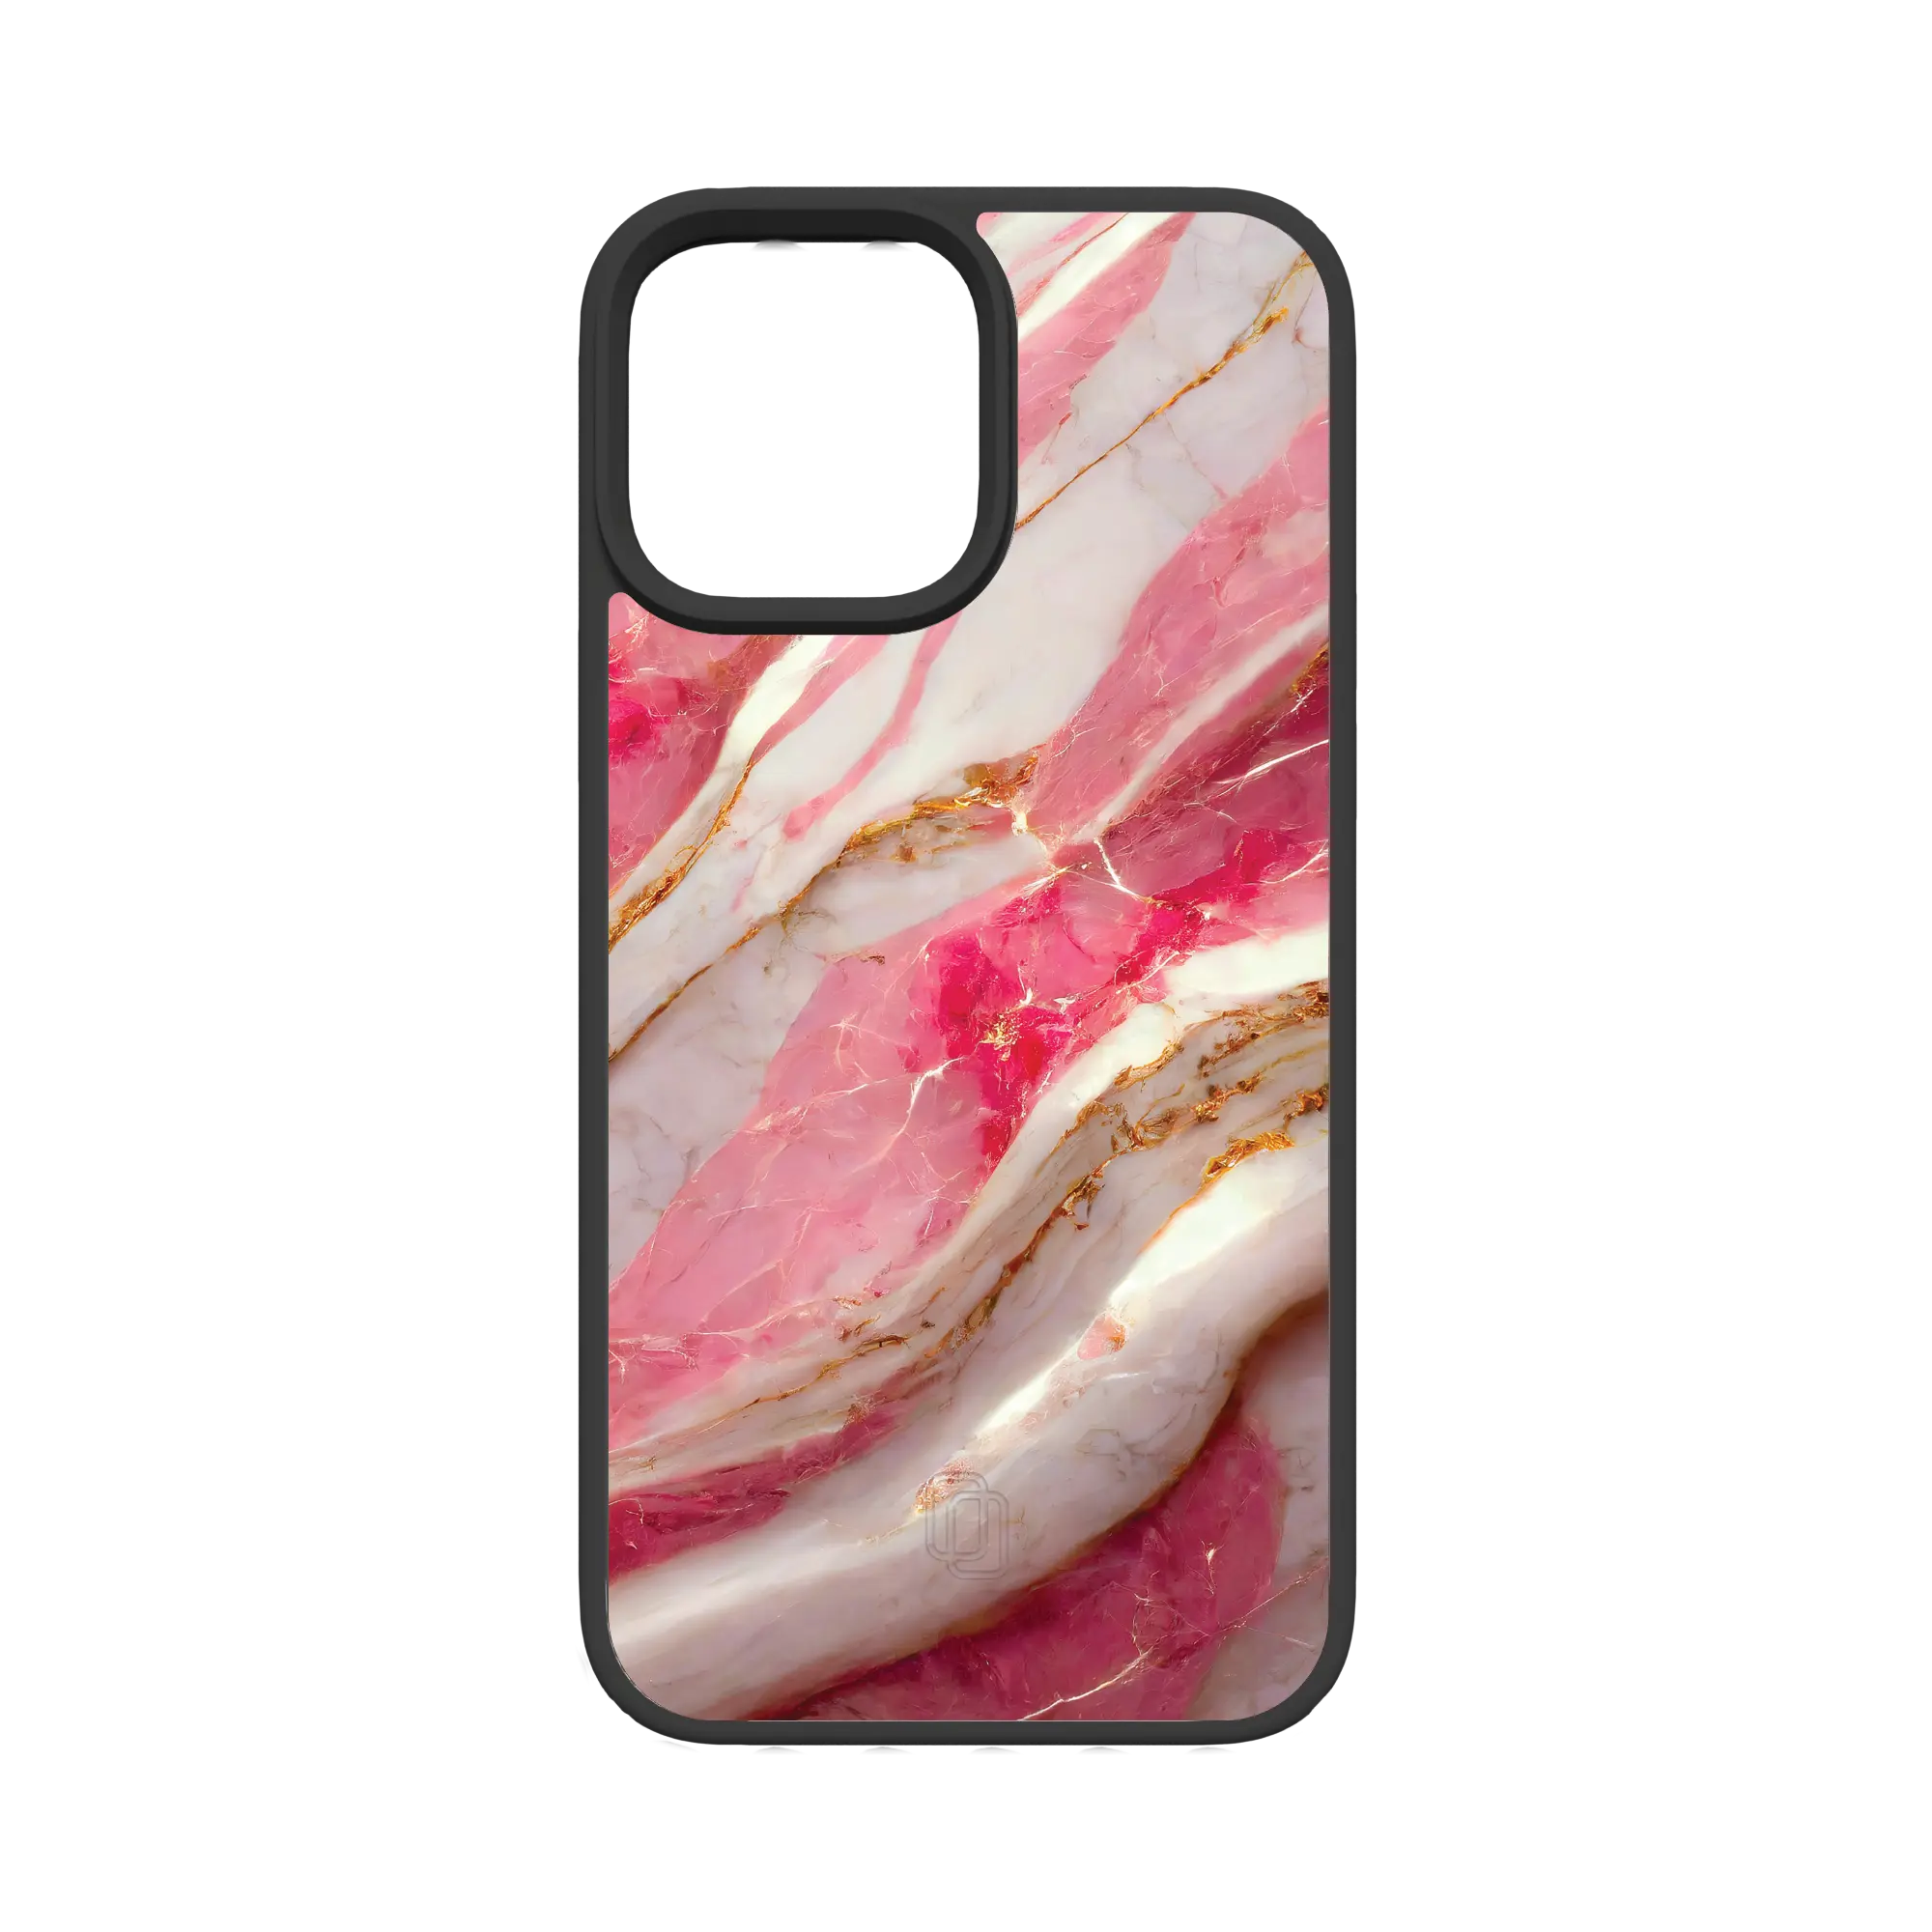 Apple-iPhone-12-Pro-Max-Crystal-Clear New Dawn | Protective MagSafe Pink Marble Case | Marble Stone Collection for Apple iPhone 12 Series cellhelmet cellhelmet